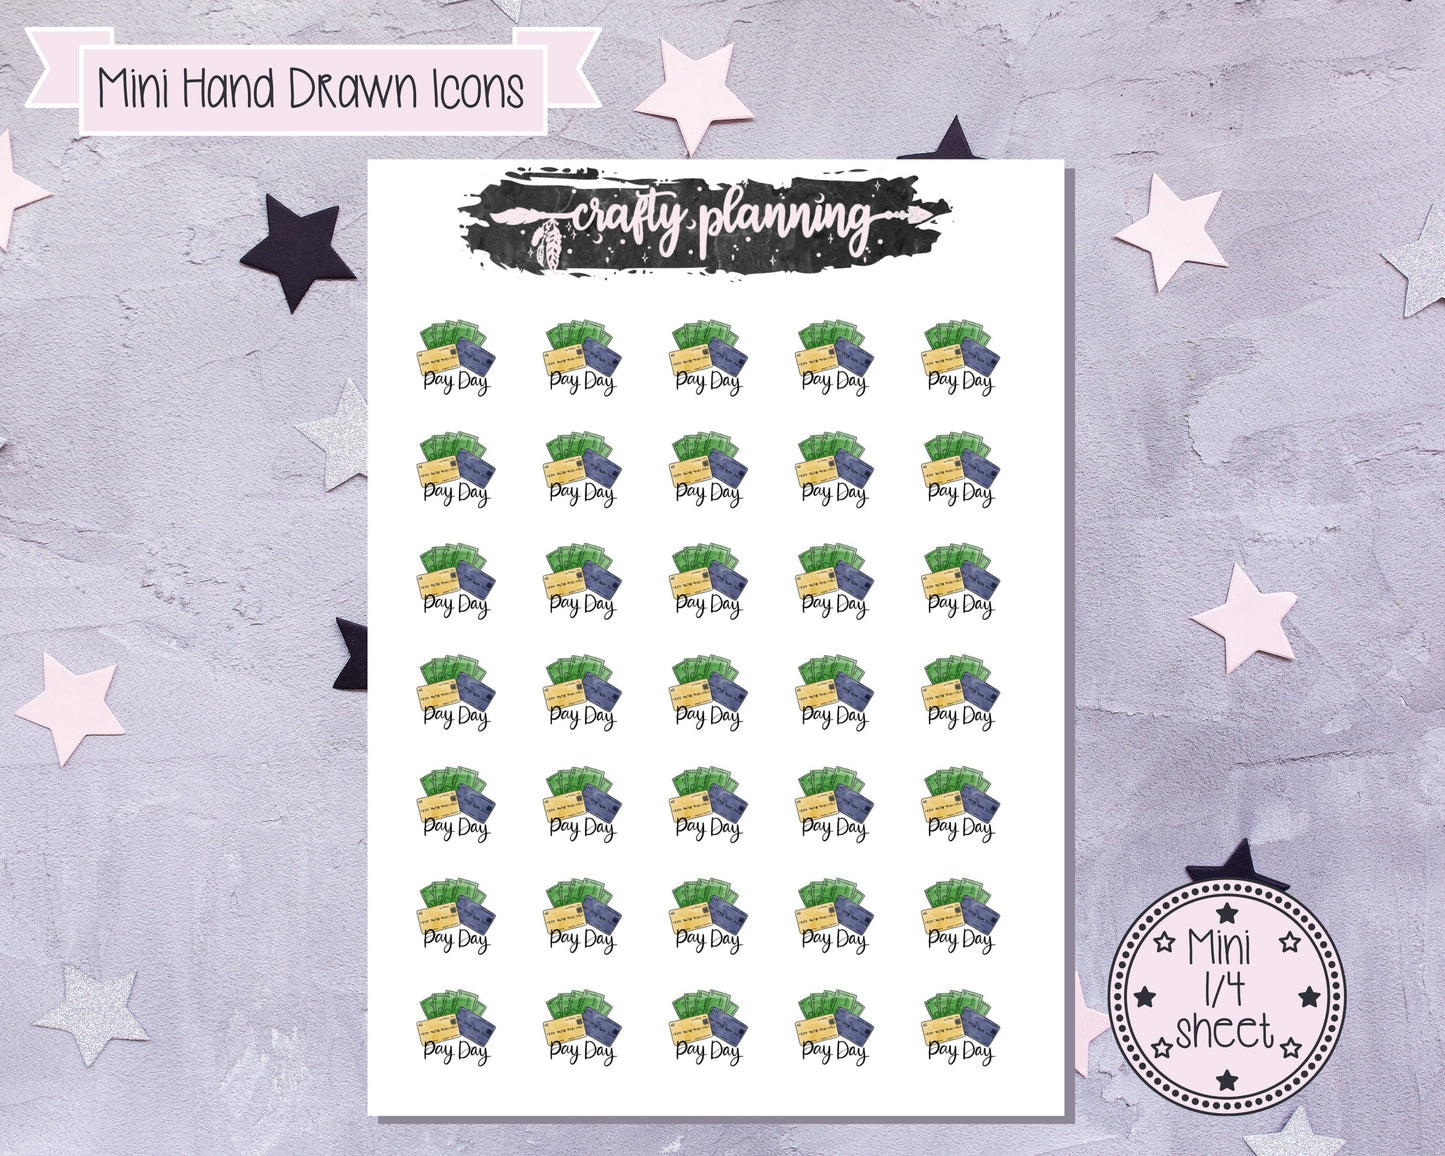 Pay Day Stickers, Work Stickers, Money Stickers, Finance Stickers, Finance Planning, Money Management, Planner Stickers, Functional Stickers